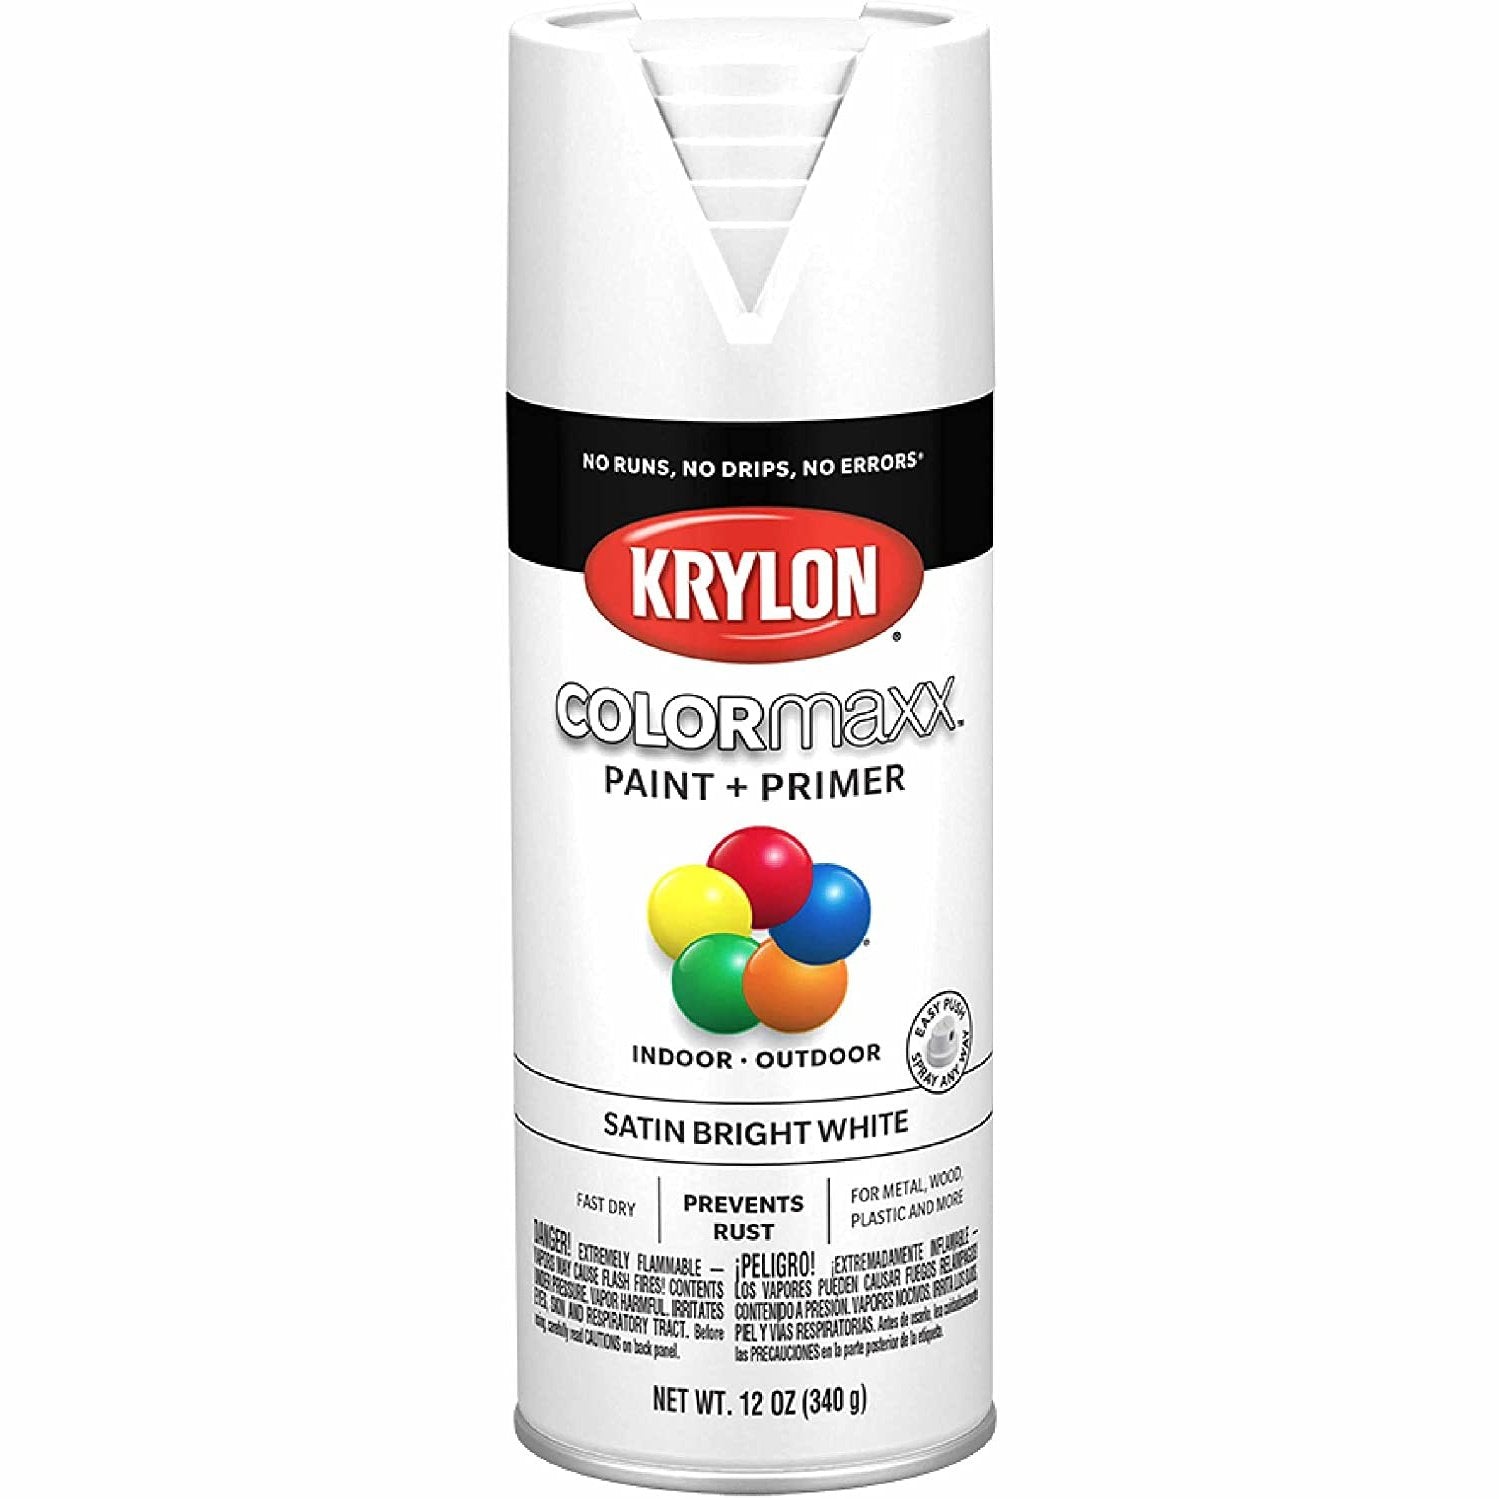 Krylon K05525007 COLORmaxx Spray Paint and Primer for Indoor/Outdoor Use, Gloss Ivy Leaf Green